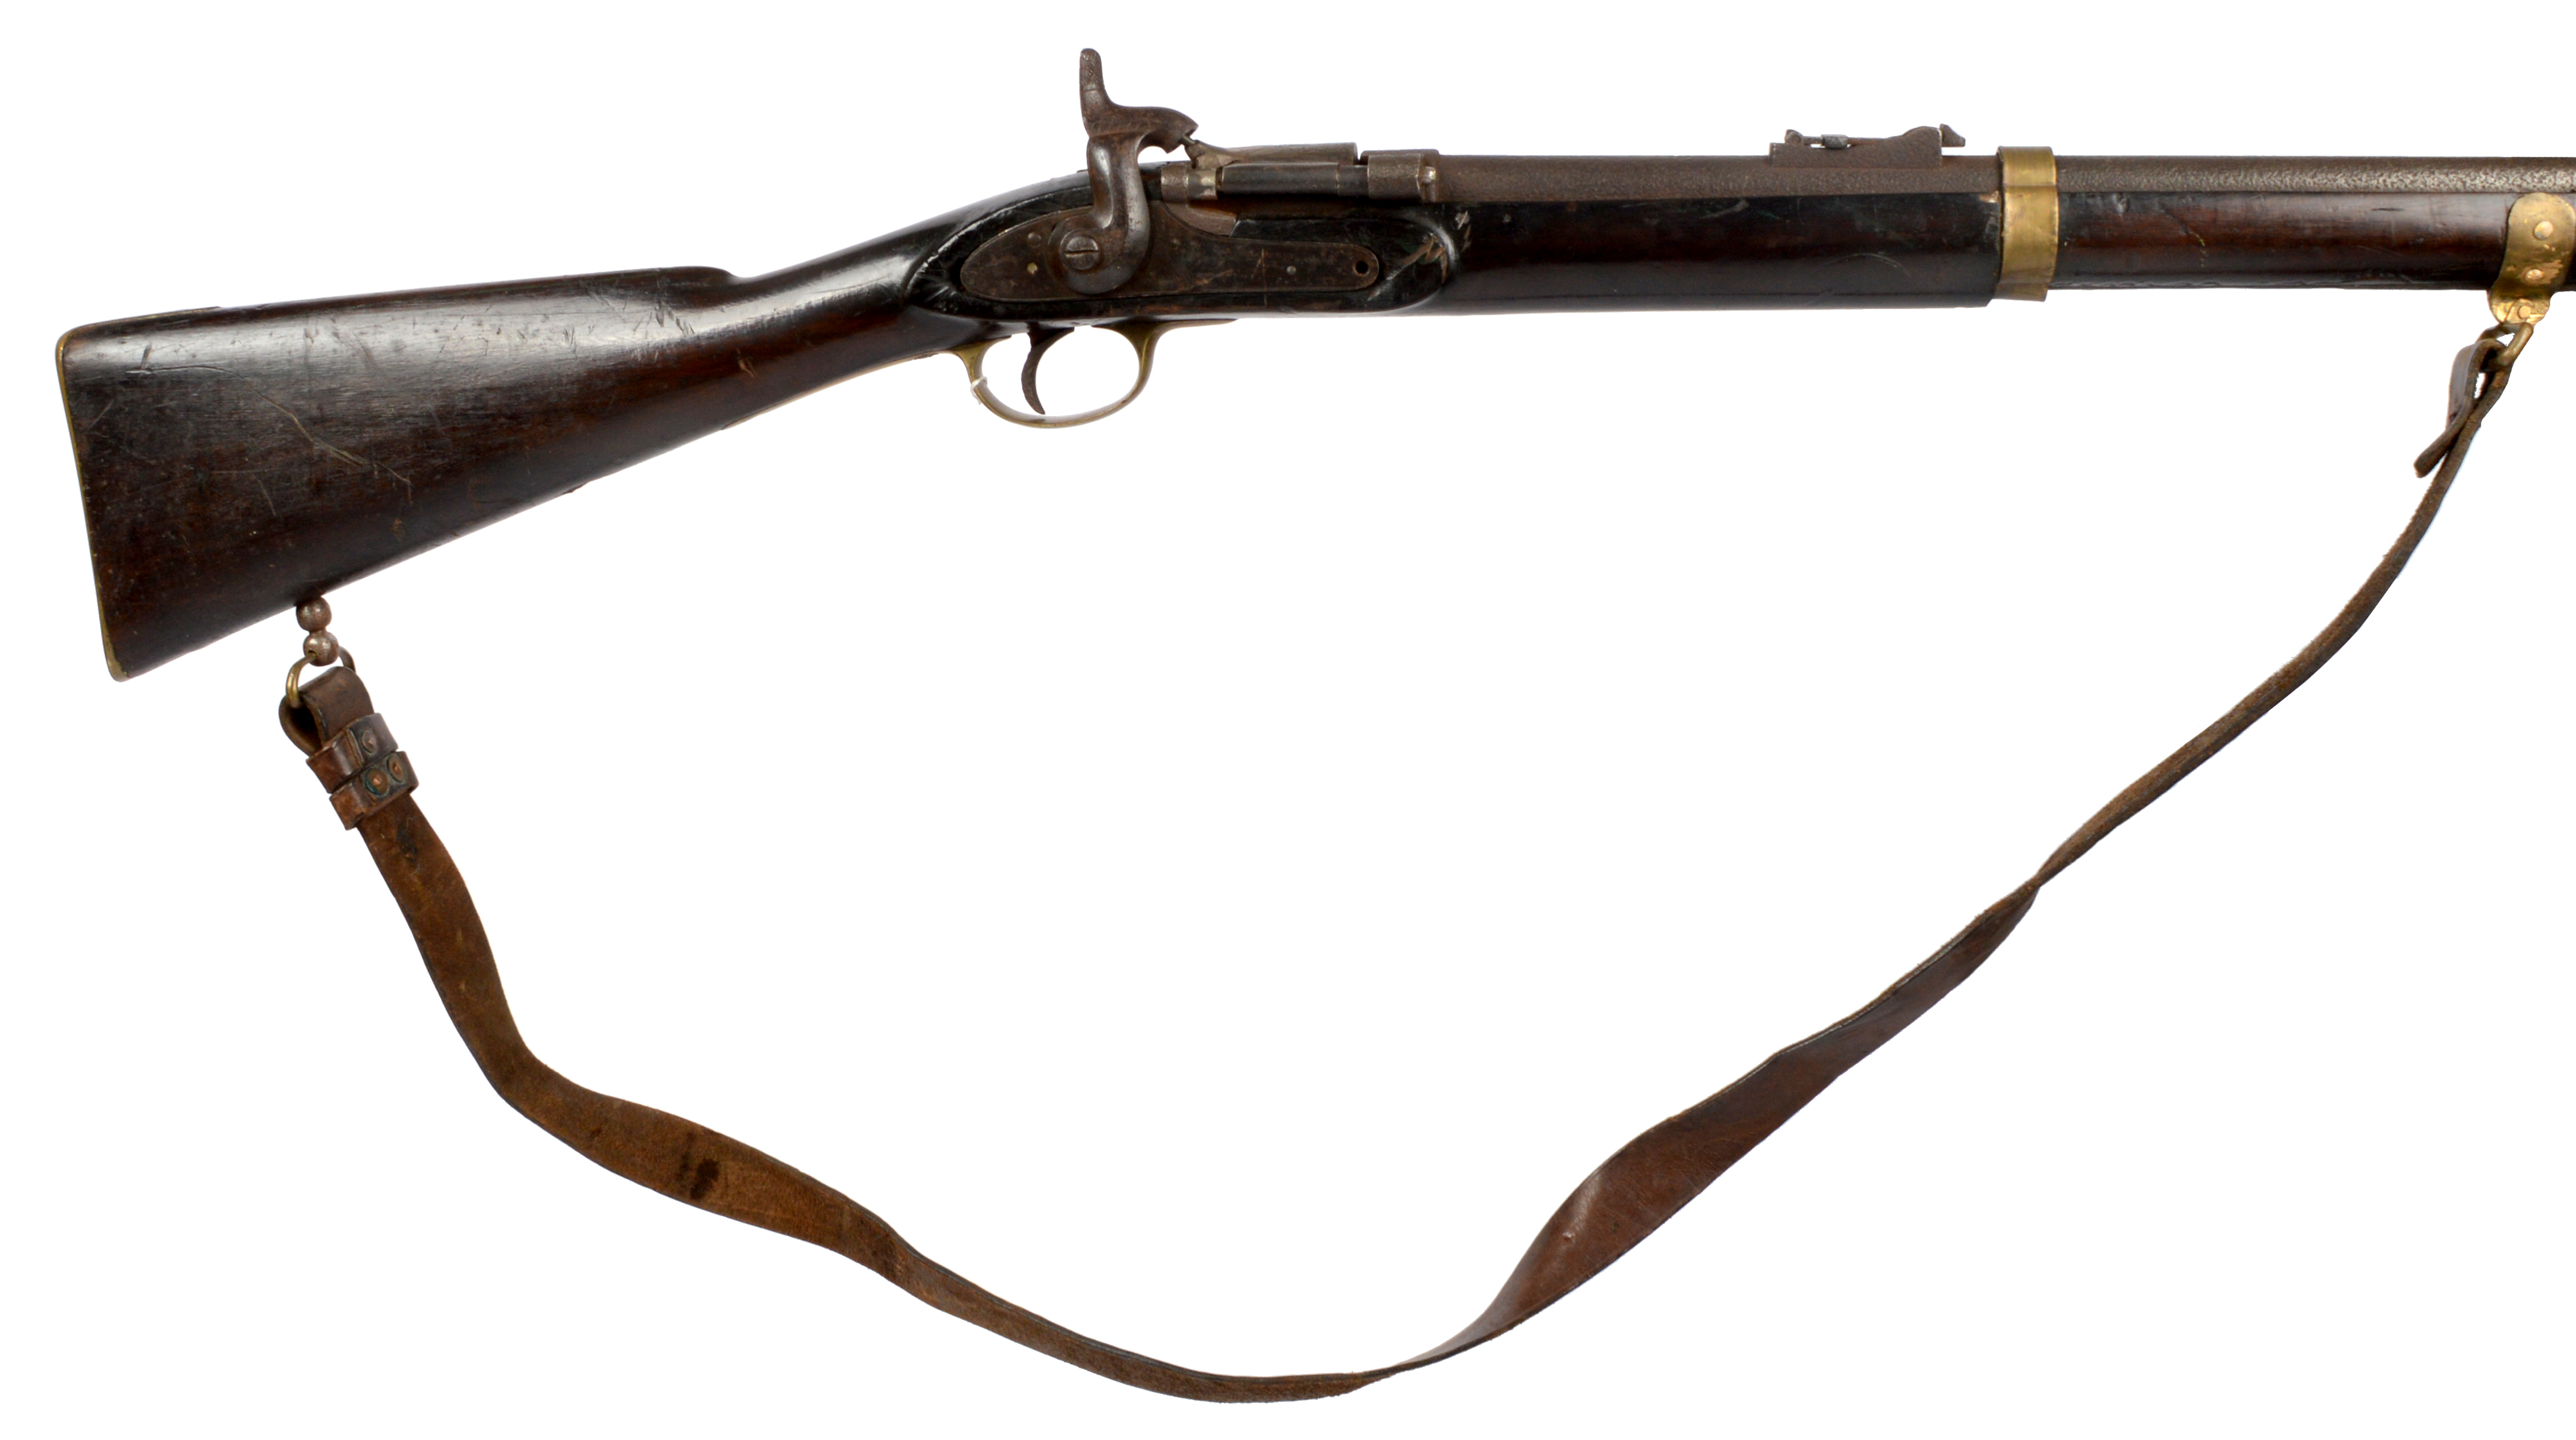 The major parts of a commercial .577 Snider carbine, military configuration, full stocked and with